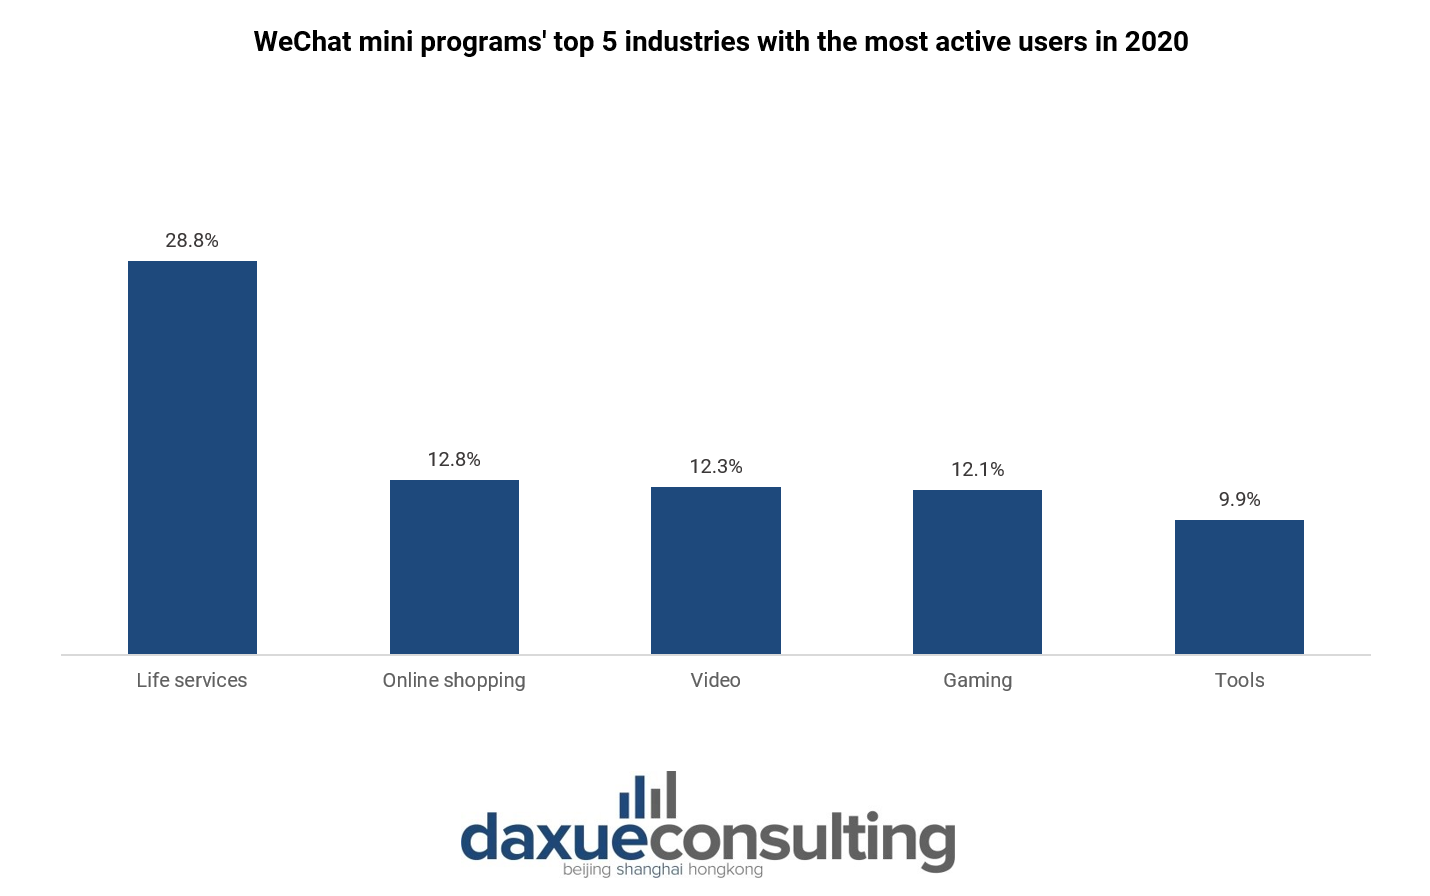 Wechat mps' top industries